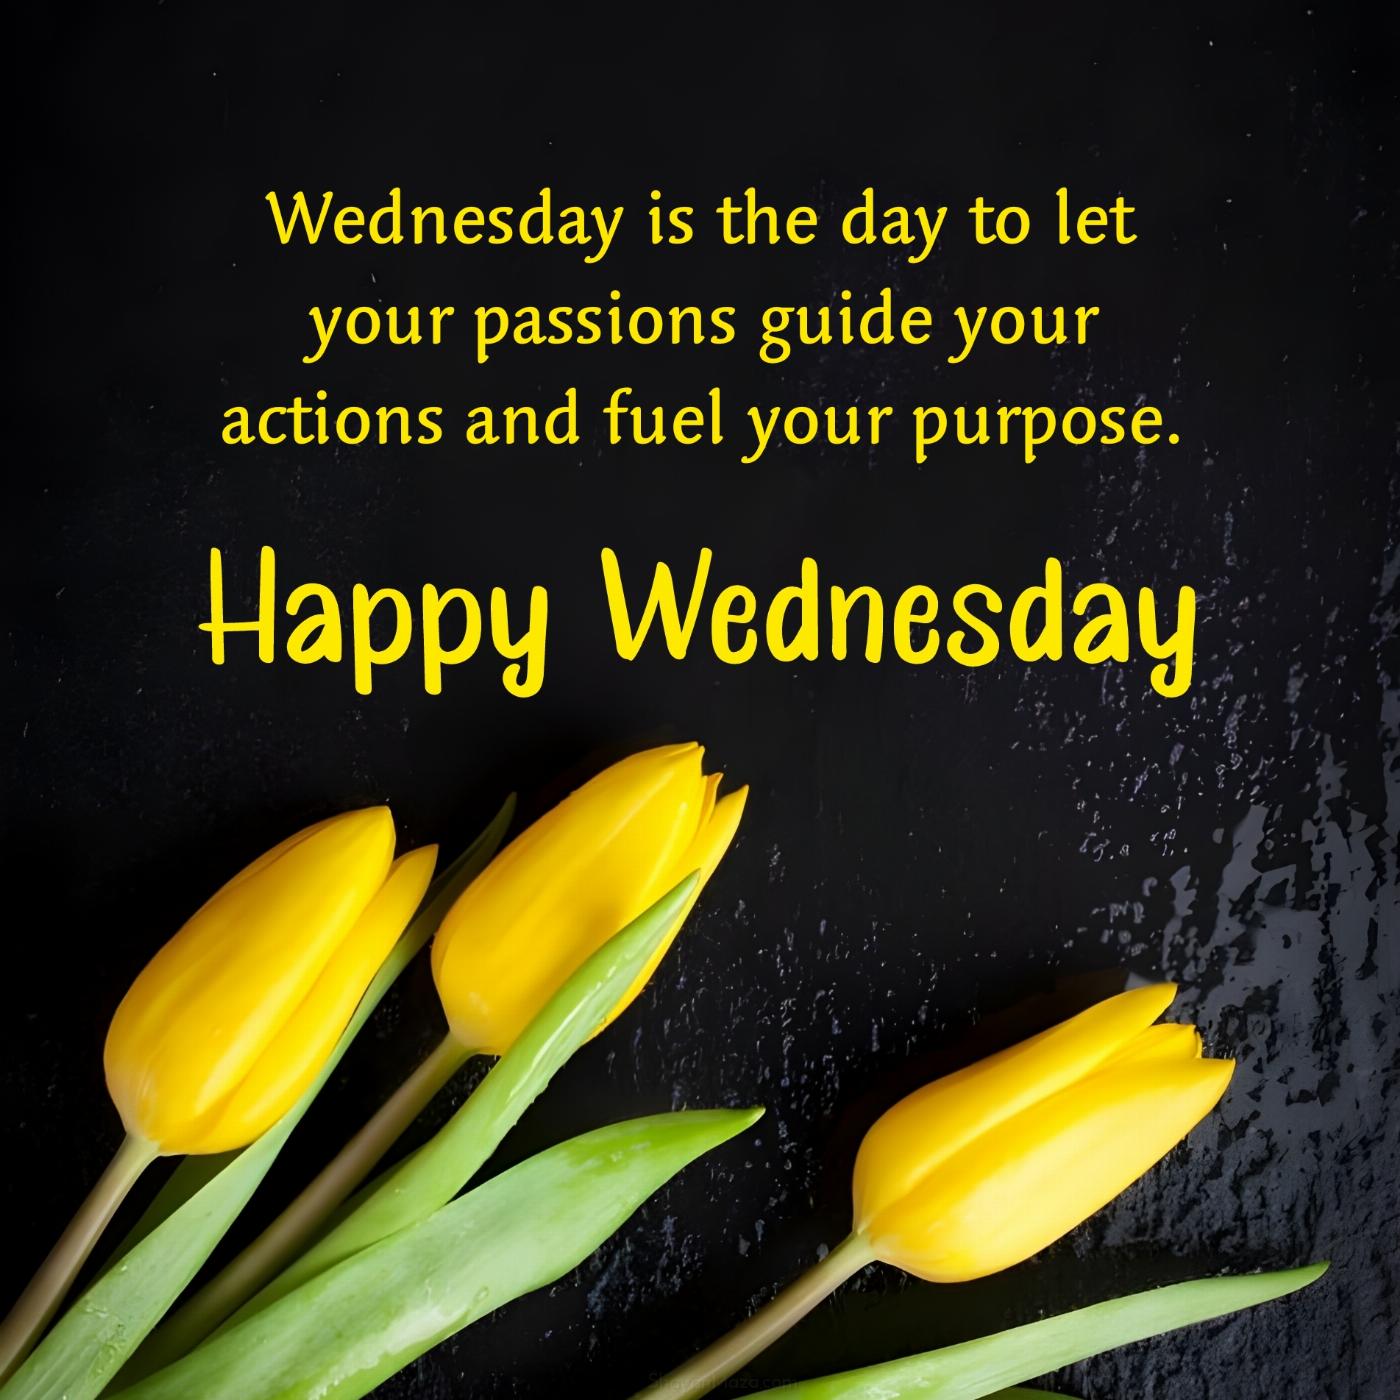 Wednesday is the day to let your passions guide your actions and fuel your purpose